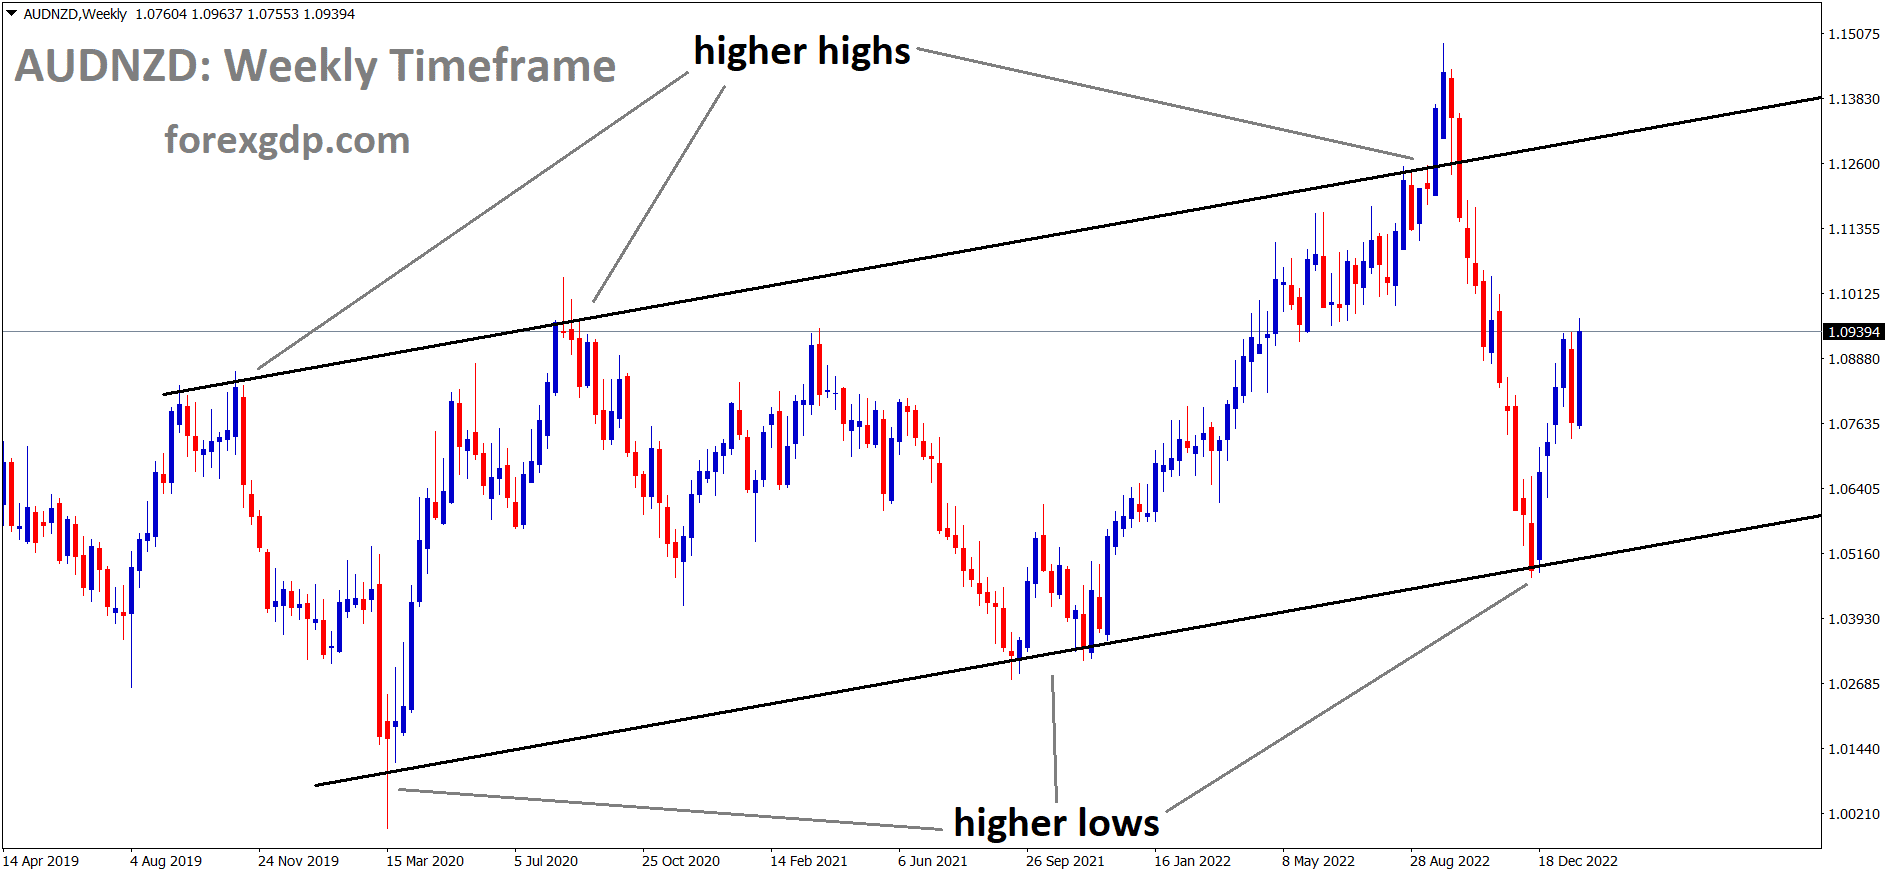 AUZNZD is moving in a Ascending channel and the market has rebounded from the higher low area of the channel.